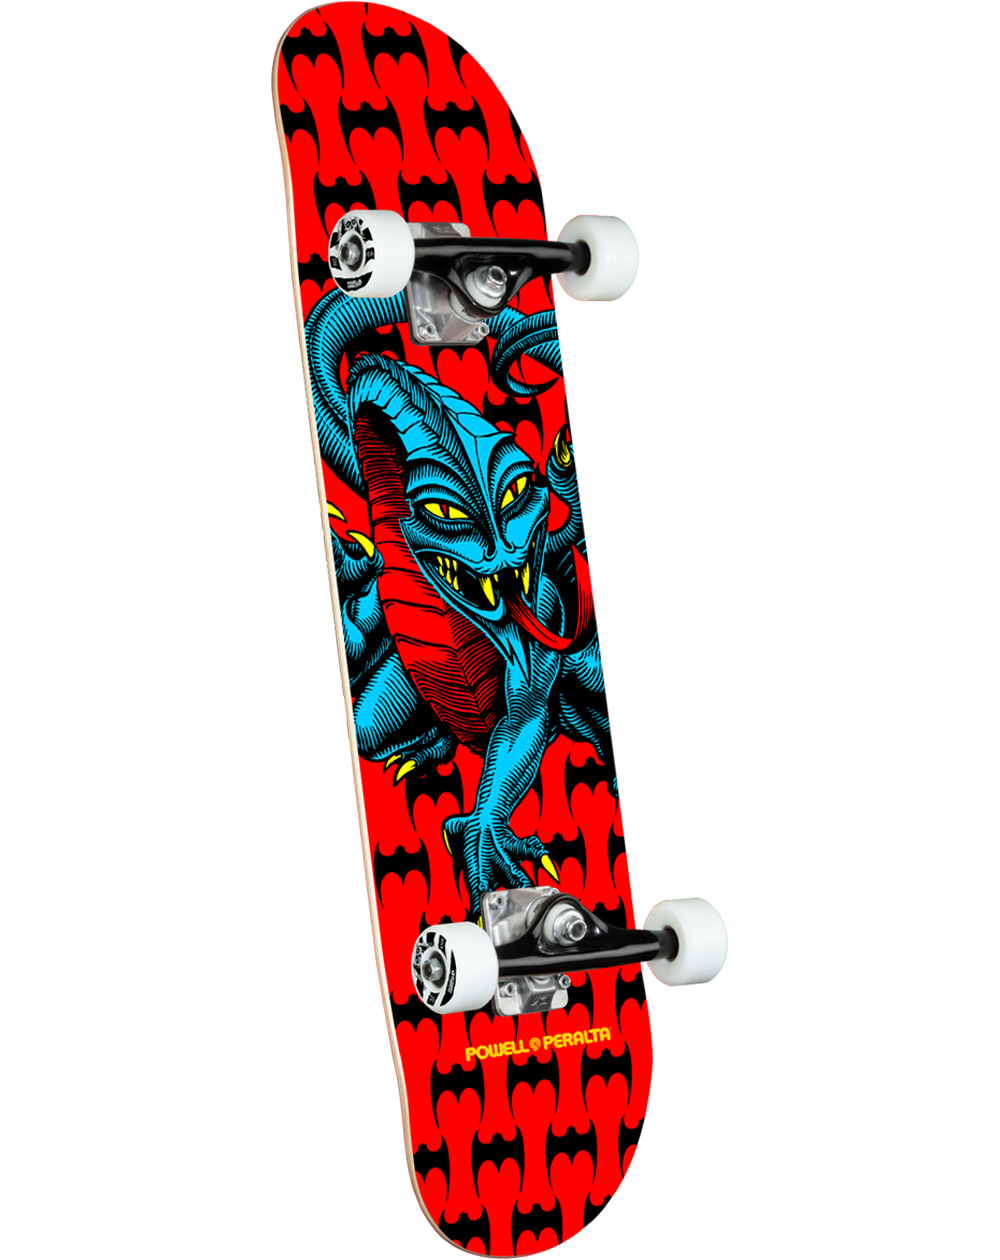 Powell Peralta Skateboard Complète Cab Dragon 7.75" Red